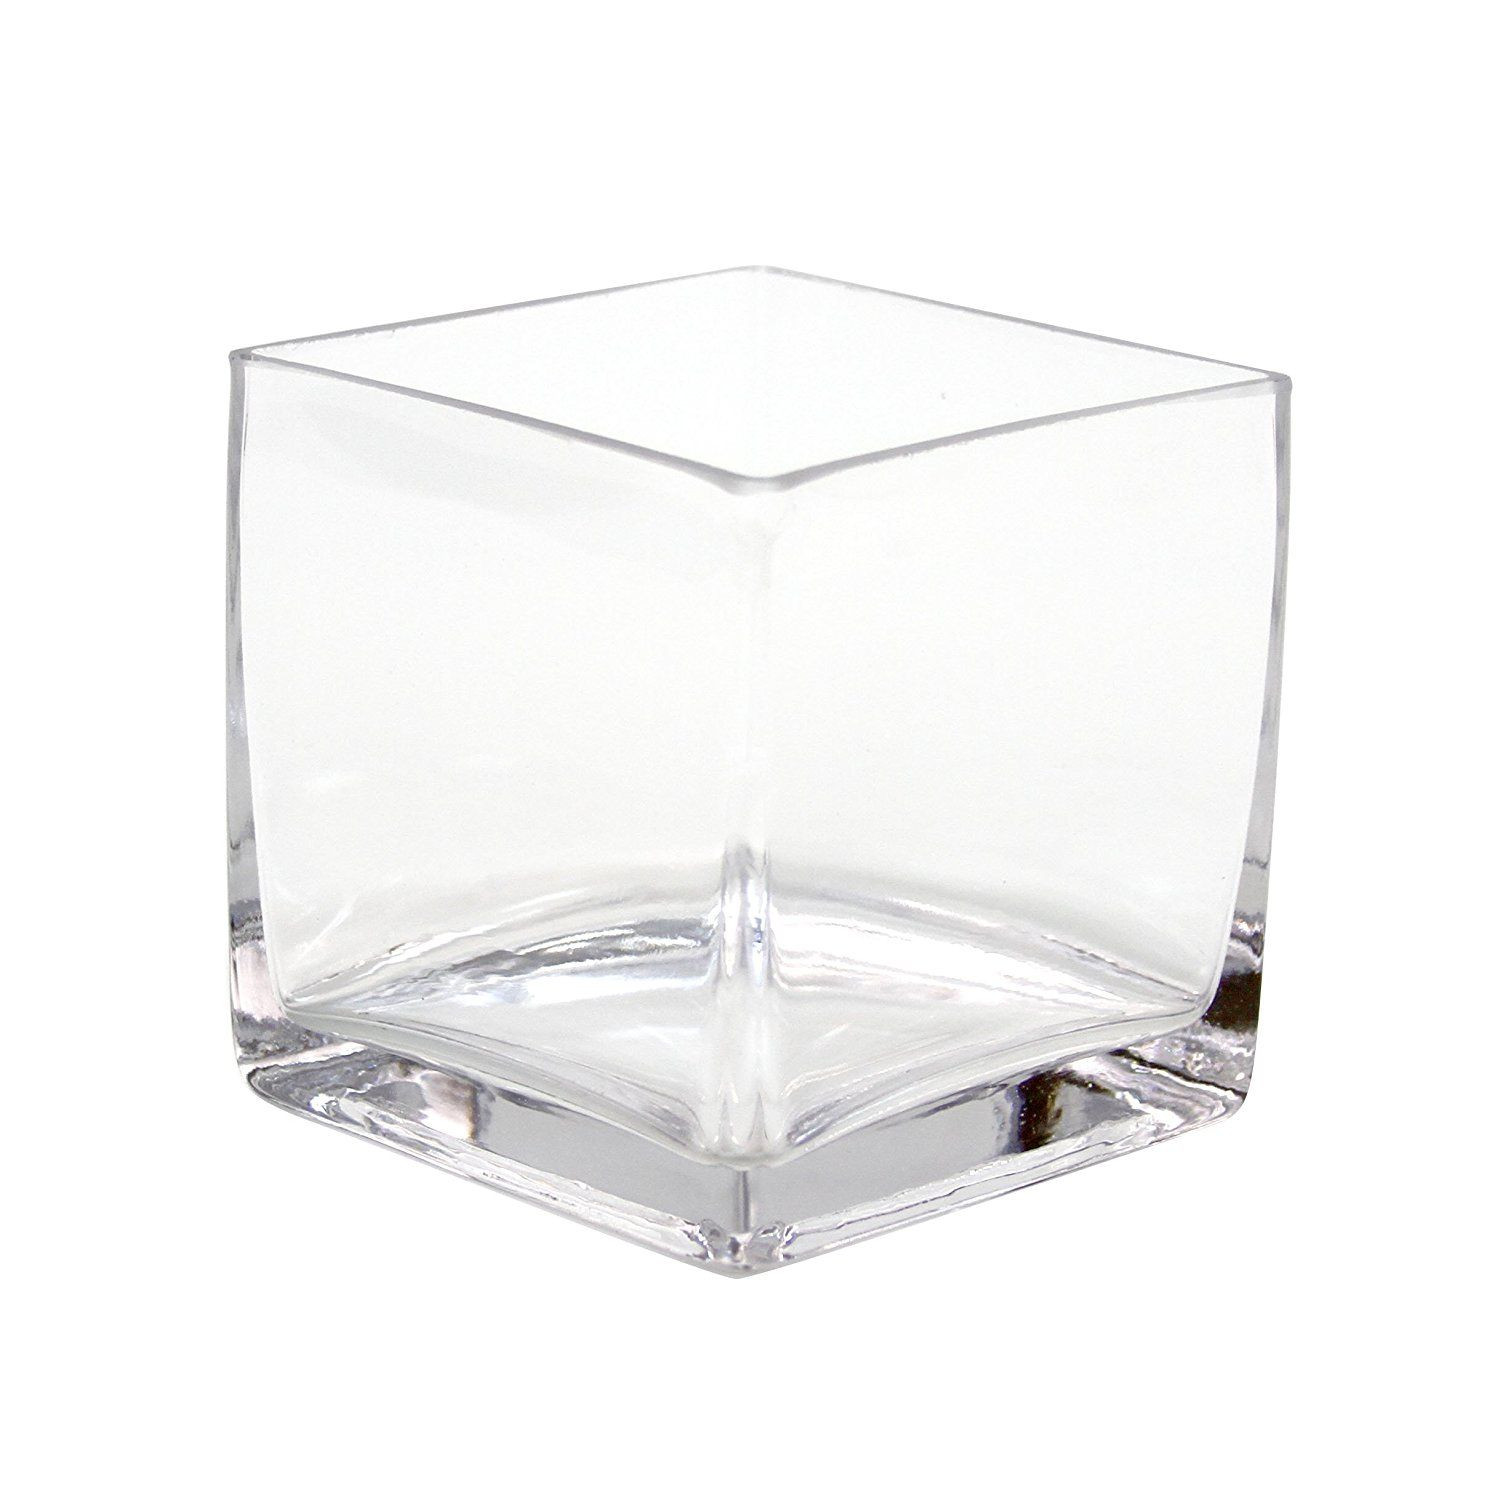 21 Lovely Clear Cube Vase 2024 free download clear cube vase of koyal wholesale 404343 12 pack cube square glass vases 4 by 4 by 4 with regard to koyal wholesale 404343 12 pack cube square glass vases 4 by 4 by 4